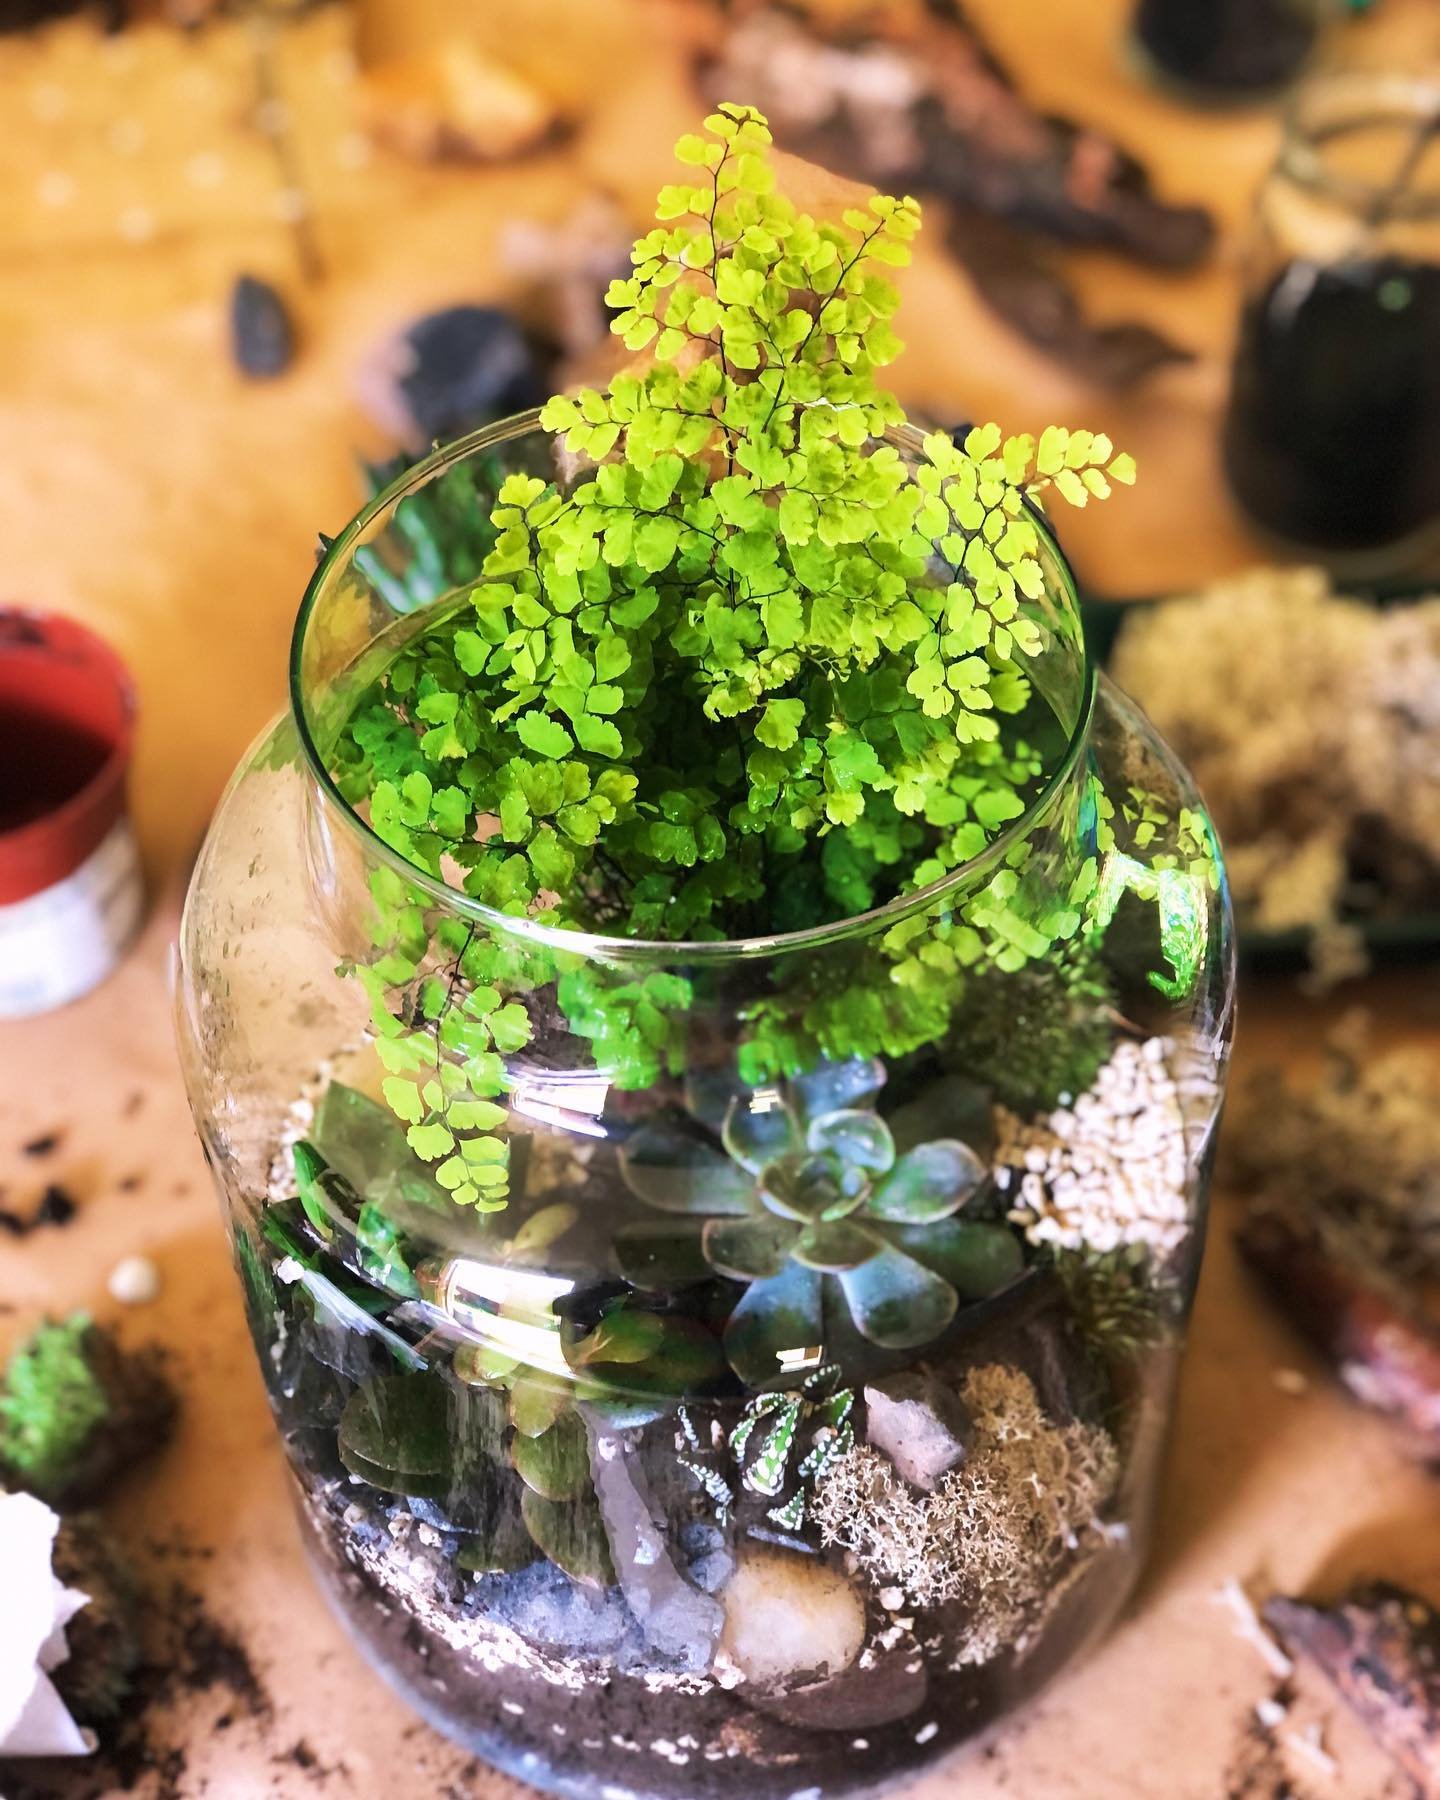 At the weekend we had a fun workshop making plant terrariums with students 🌿🪴🌸

Using moss, bark, pebbles, crystals, ferns &amp; succulents - each terrarium was totally unique and special 🌿

Our next workshop is Saturday 8th June - to book, follo